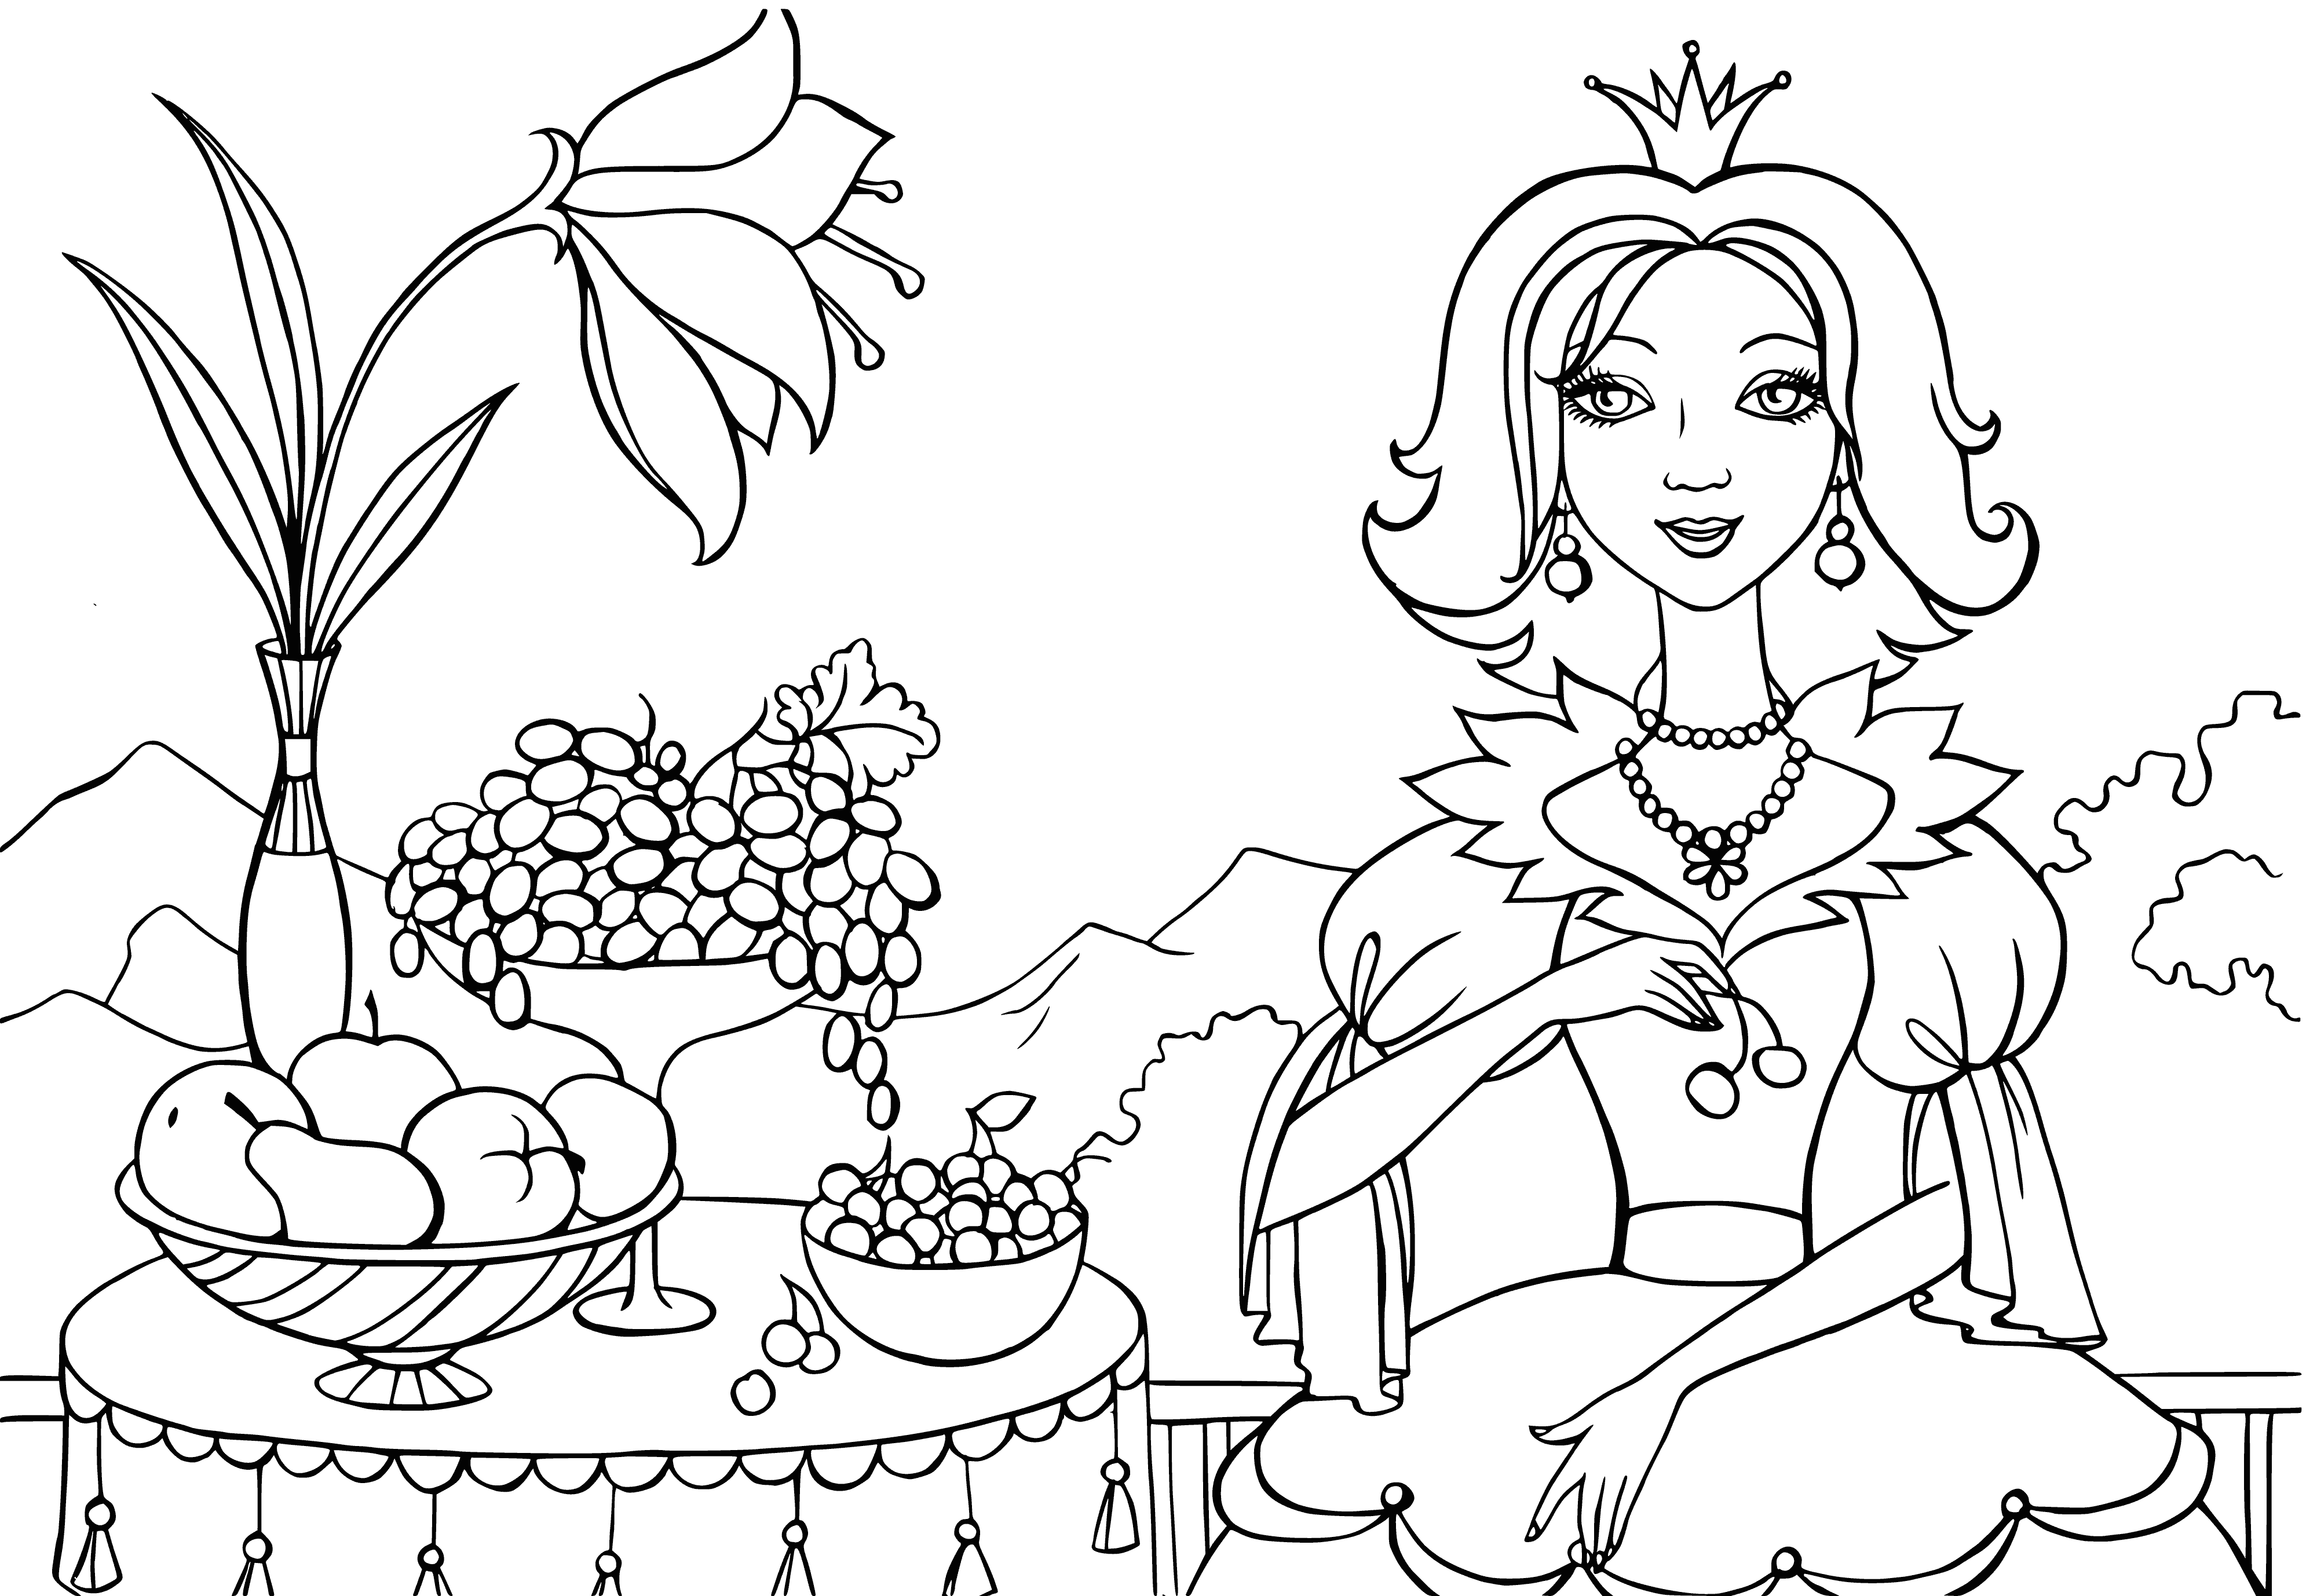 Breakfast for the princess coloring page